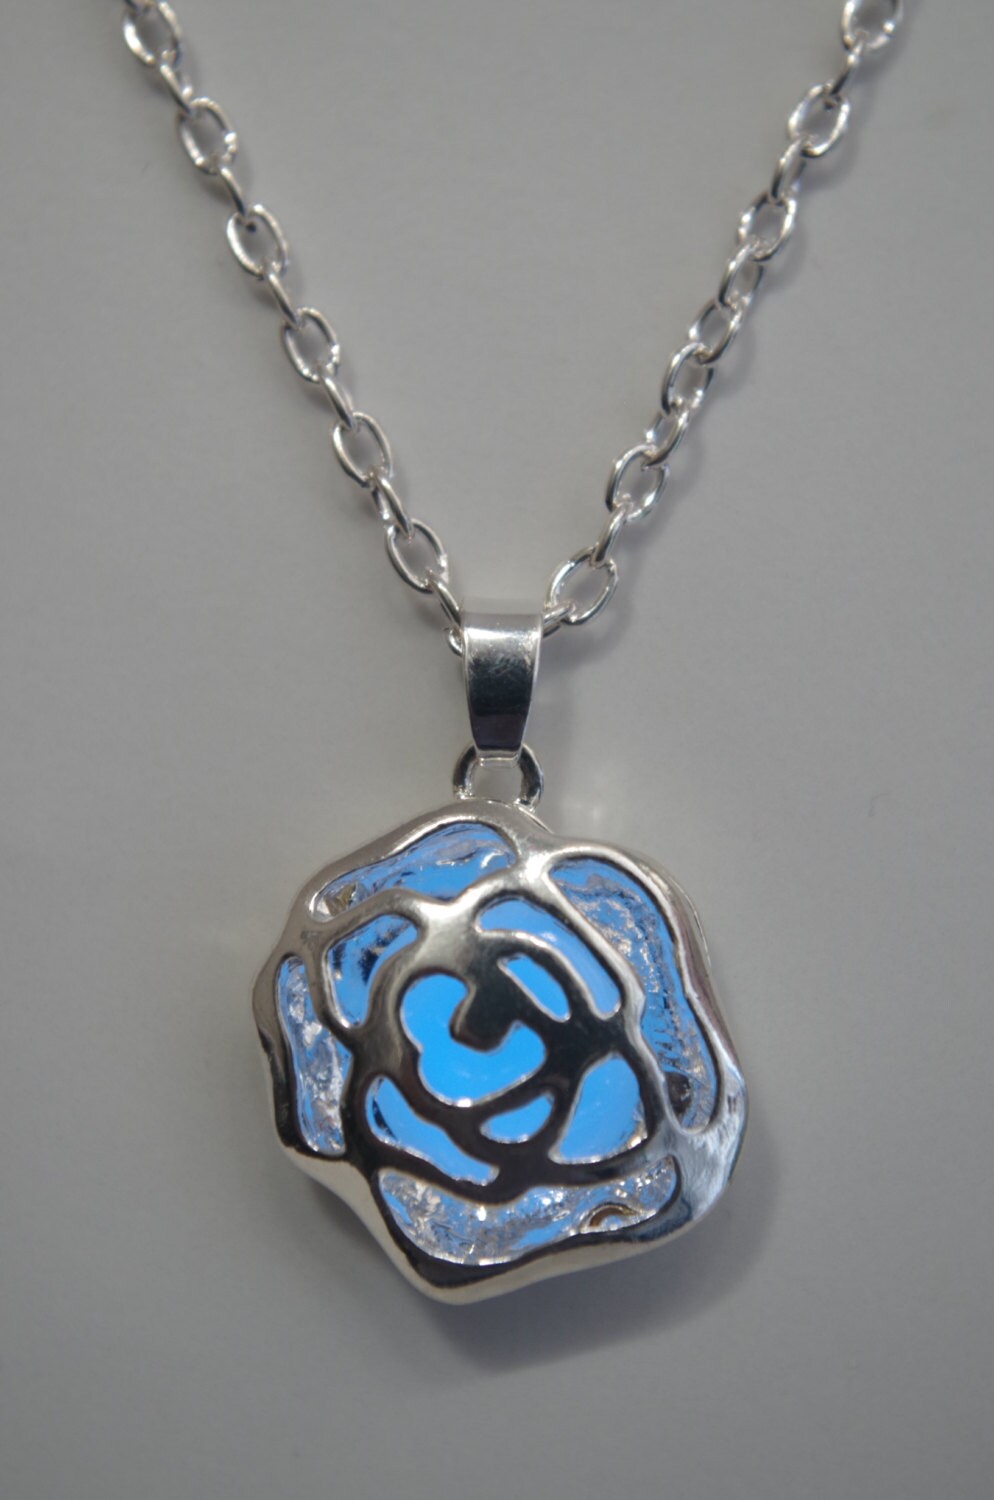 Glowing Rose Necklace Glow in the Dark Jewelry Silver Rose Aqua Glowing Necklace Mothers day gifts for  Her Women jewelry